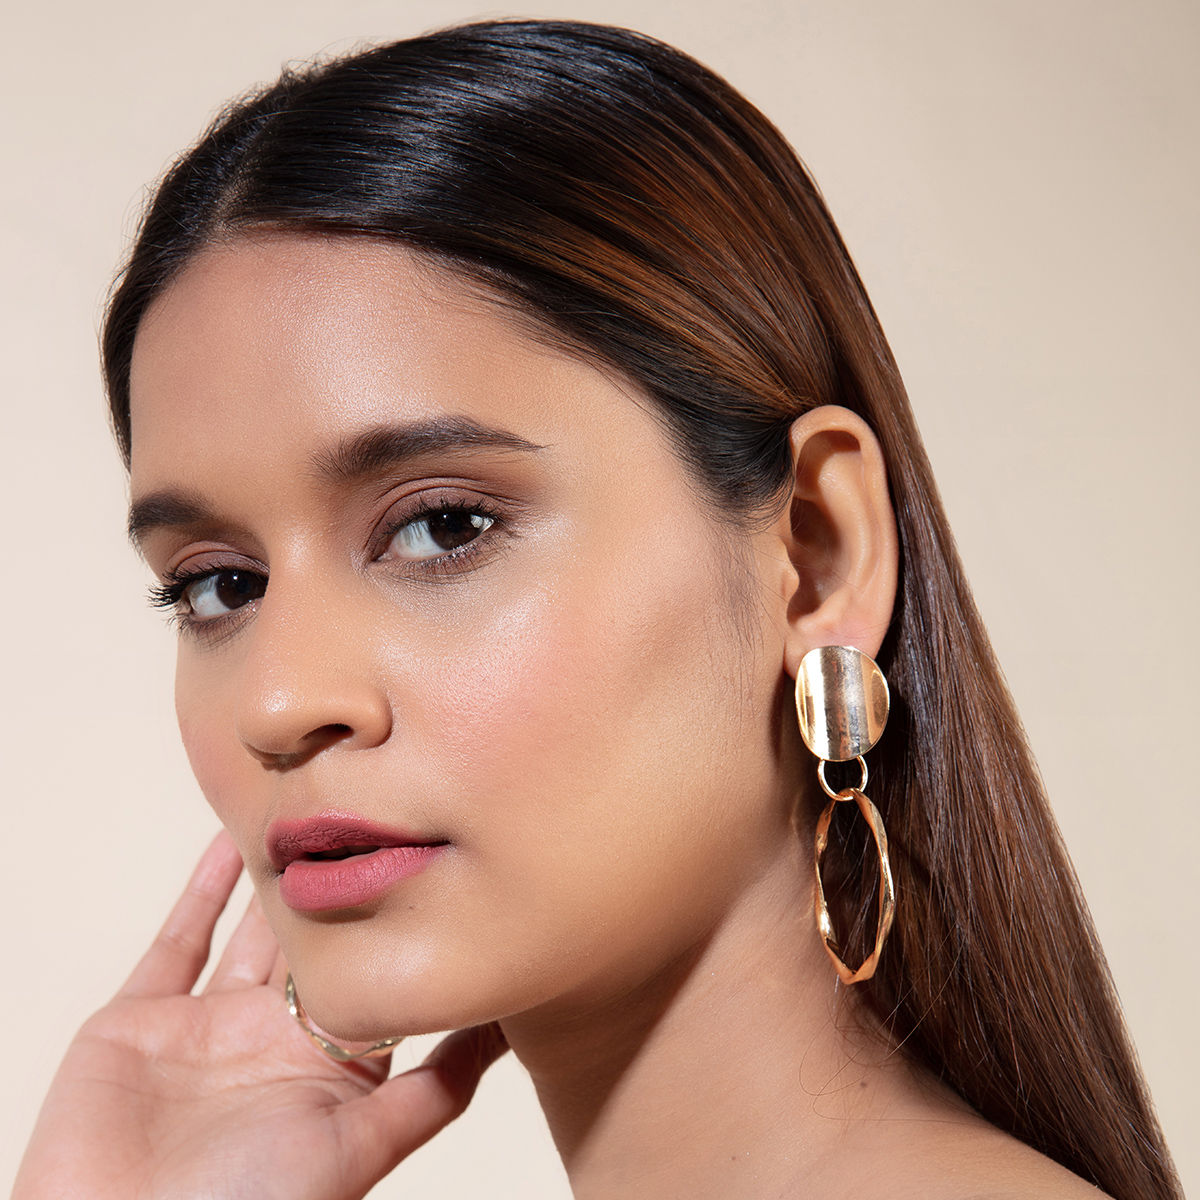 Statement Earrings - Buy Black Dresses, Silver Earrings with Black Clutches  Scrapbook Look by Aqira